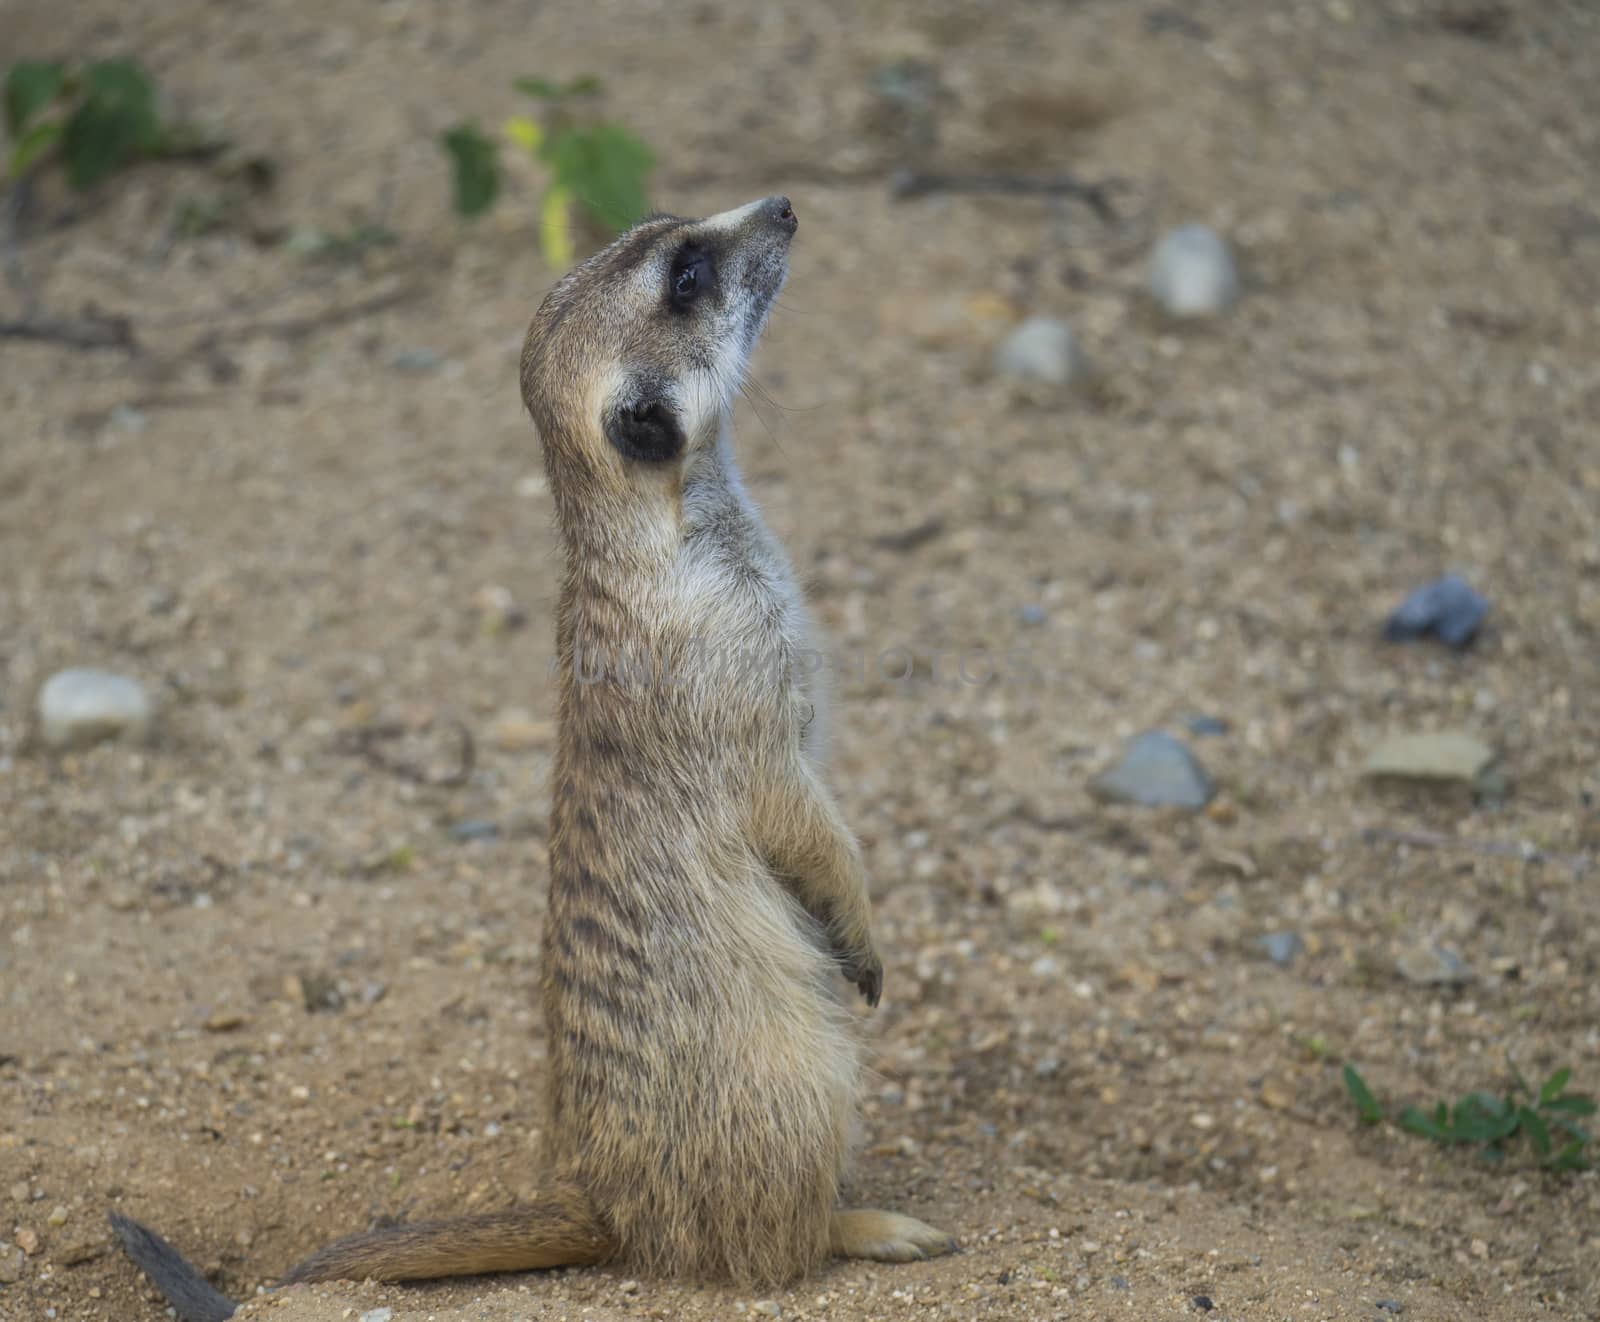 Close up portrait of standing meerkat or suricate, Suricata suricatta profile side view, selective focus, copy space for text by Henkeova